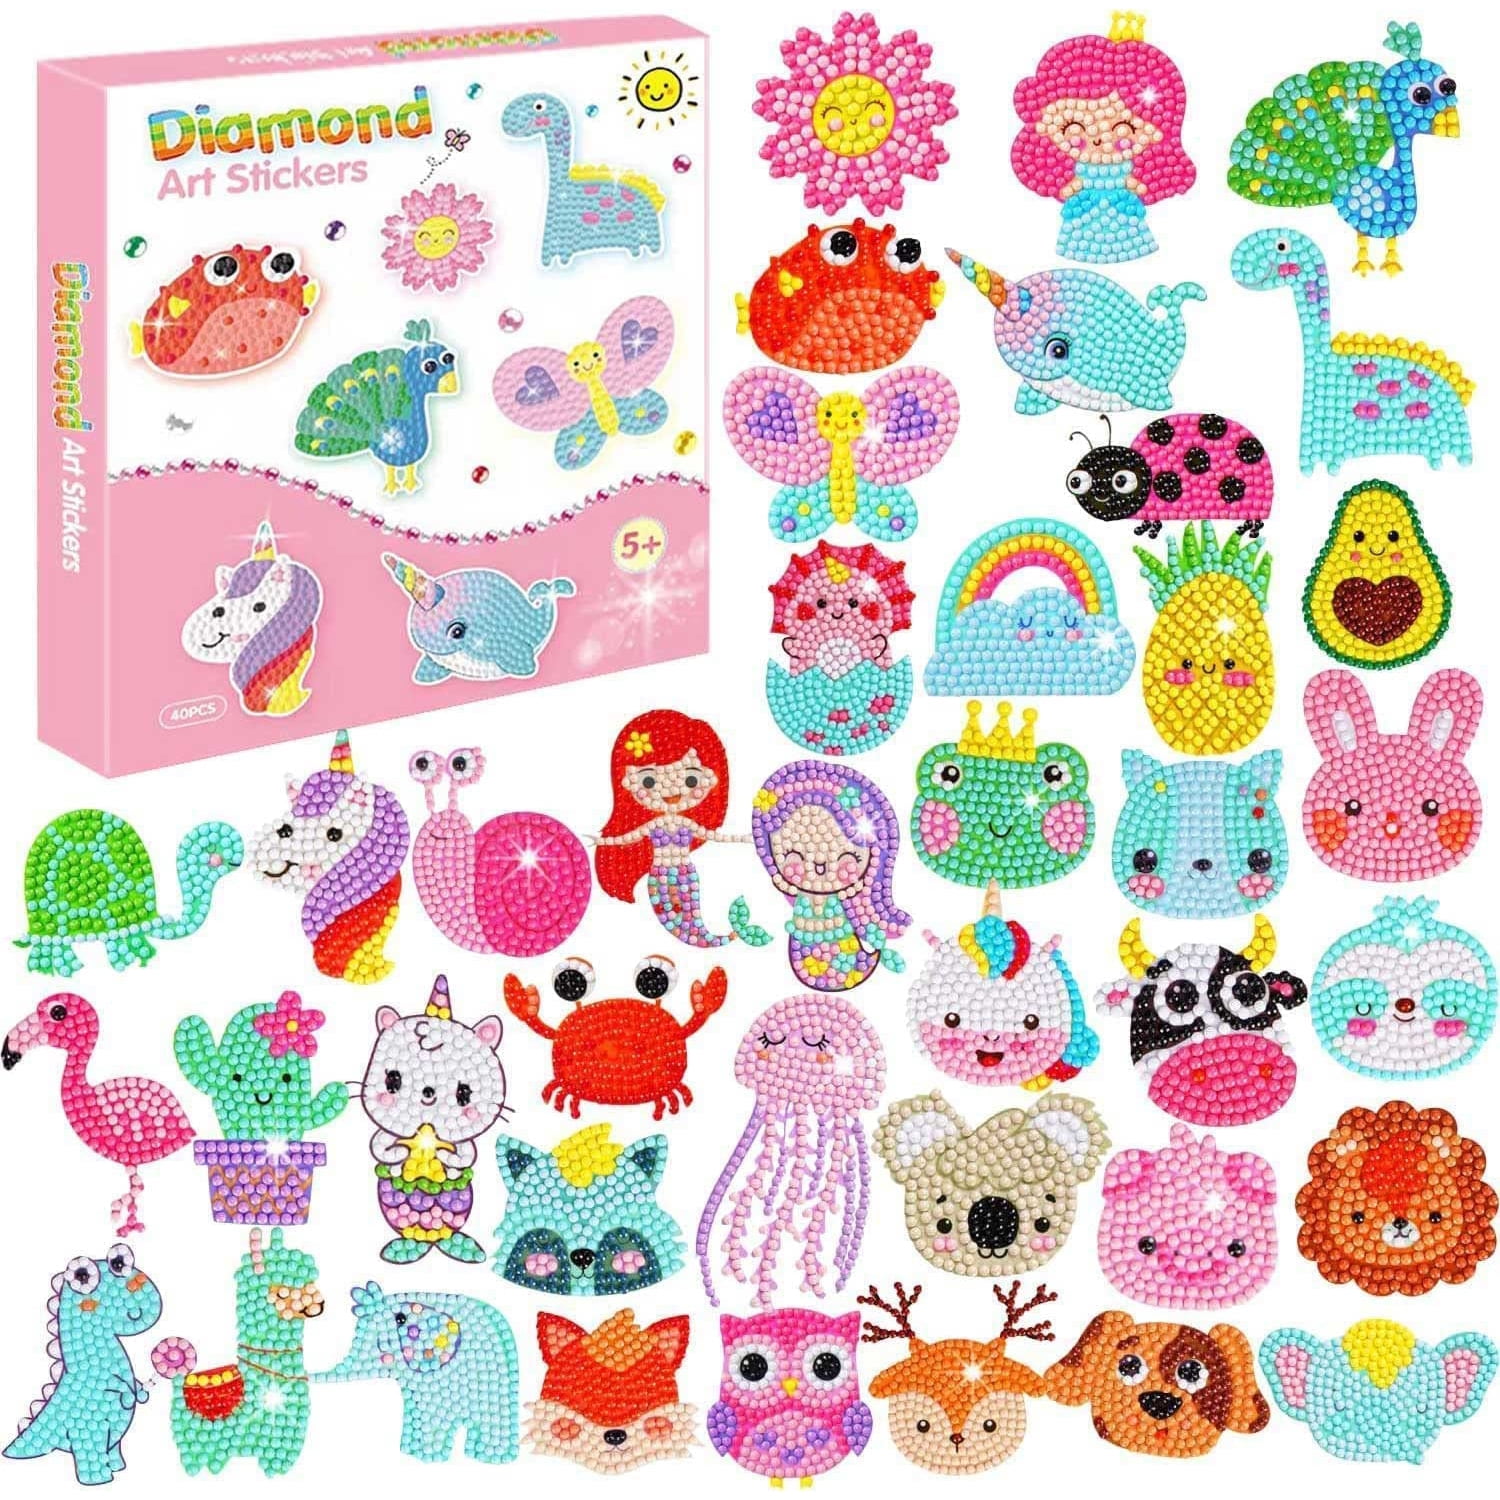 Arts and Crafts Supplies, Diamond Stickers DIY Craft Kits, Arts and Crafts  for Kids, Toys for Girls Ages 5 6 7 8 9 10 11 12 Years Old 